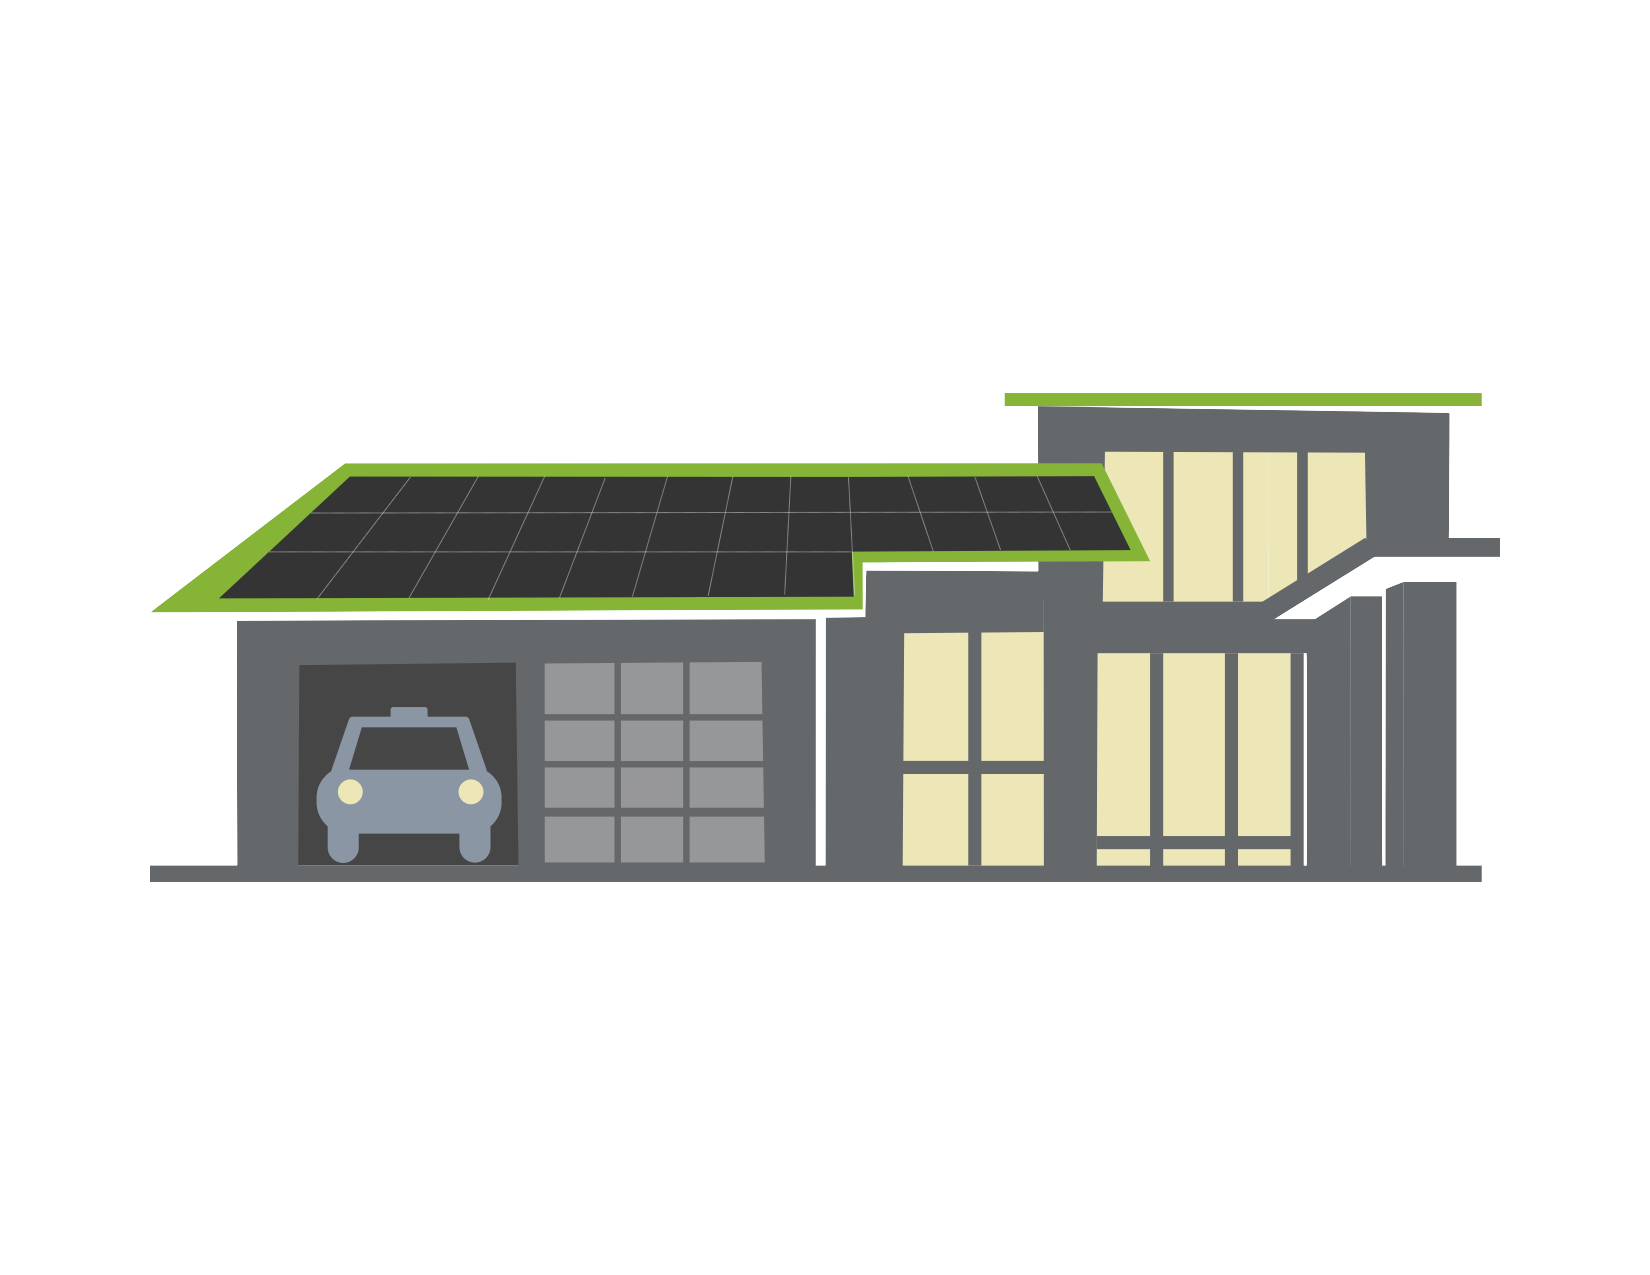 Roofs provide a perfect spot for solar panels. With the advancements in solar racking technology, panels can be securely mounted on most roof types.